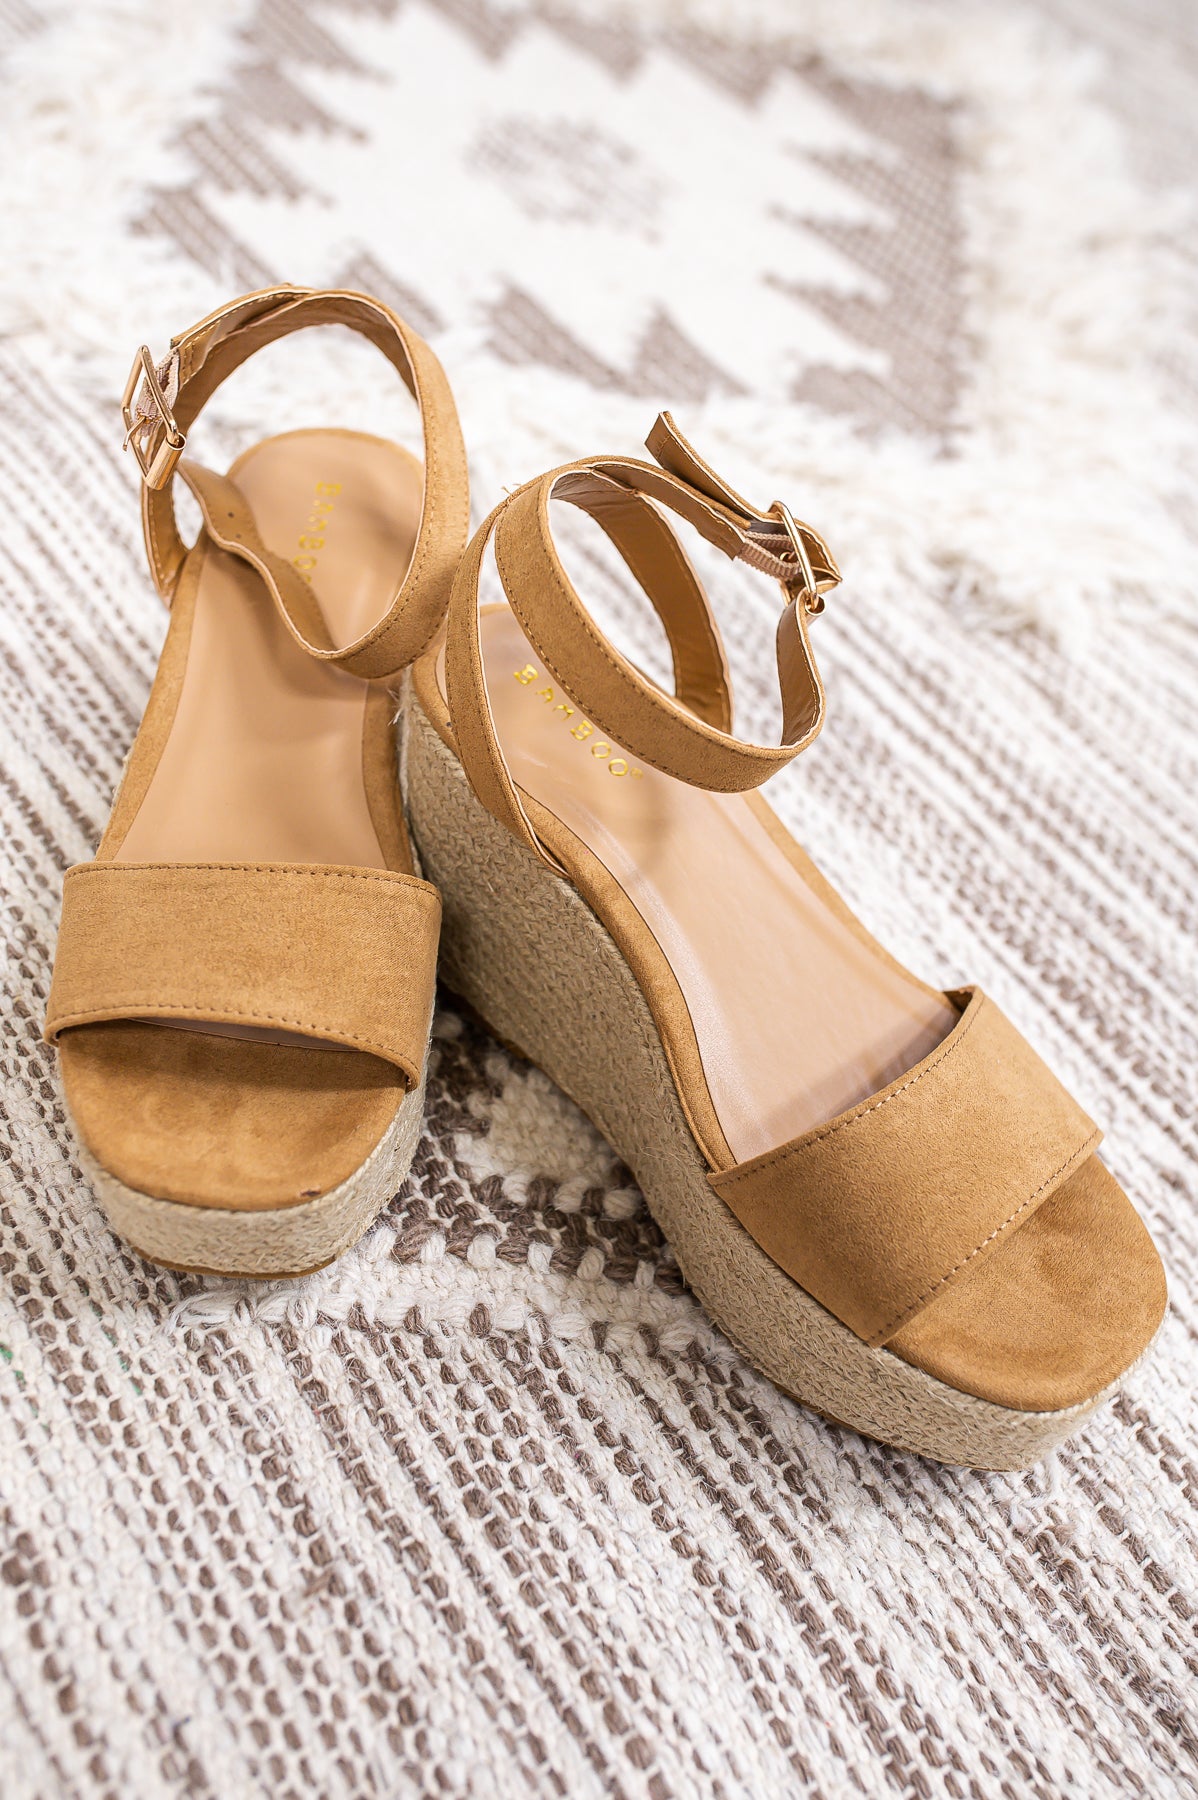 A Date With Destiny Nude/Gold Studded Espadrille Wedge Sandals - SHO2541NU